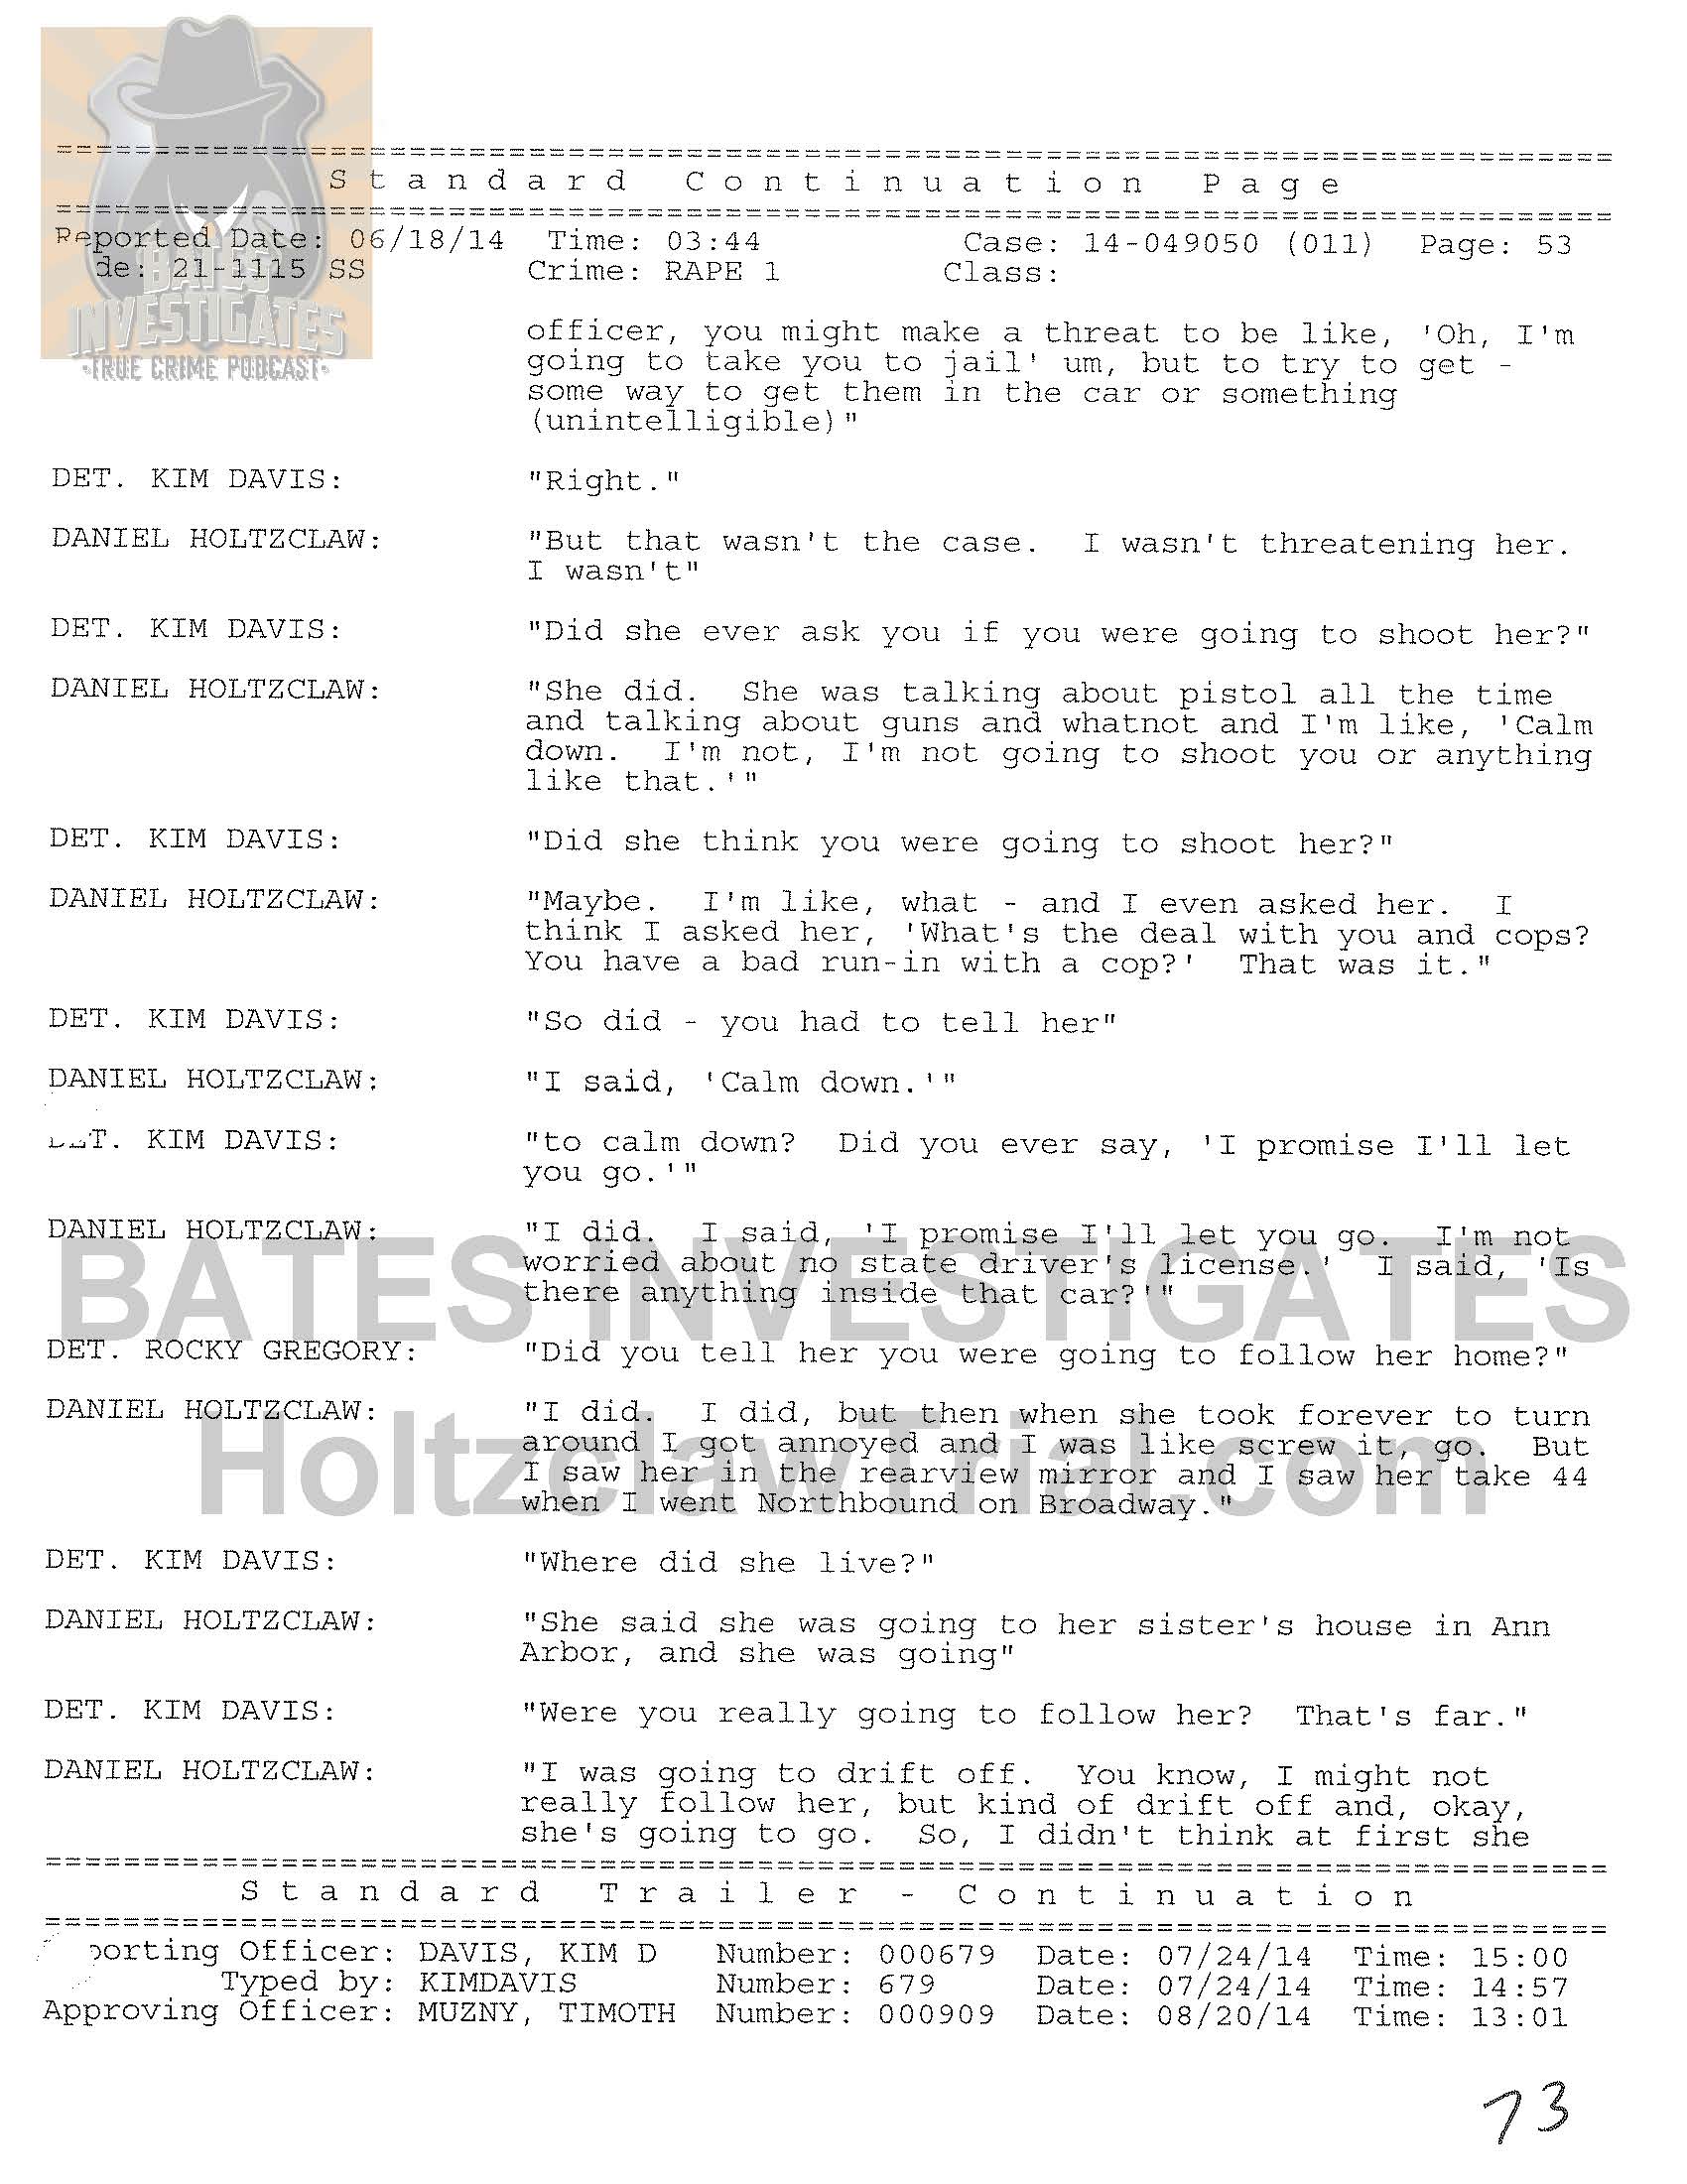 Holtzclaw Interrogation Transcript - Ep02 Redacted_Page_53.jpg